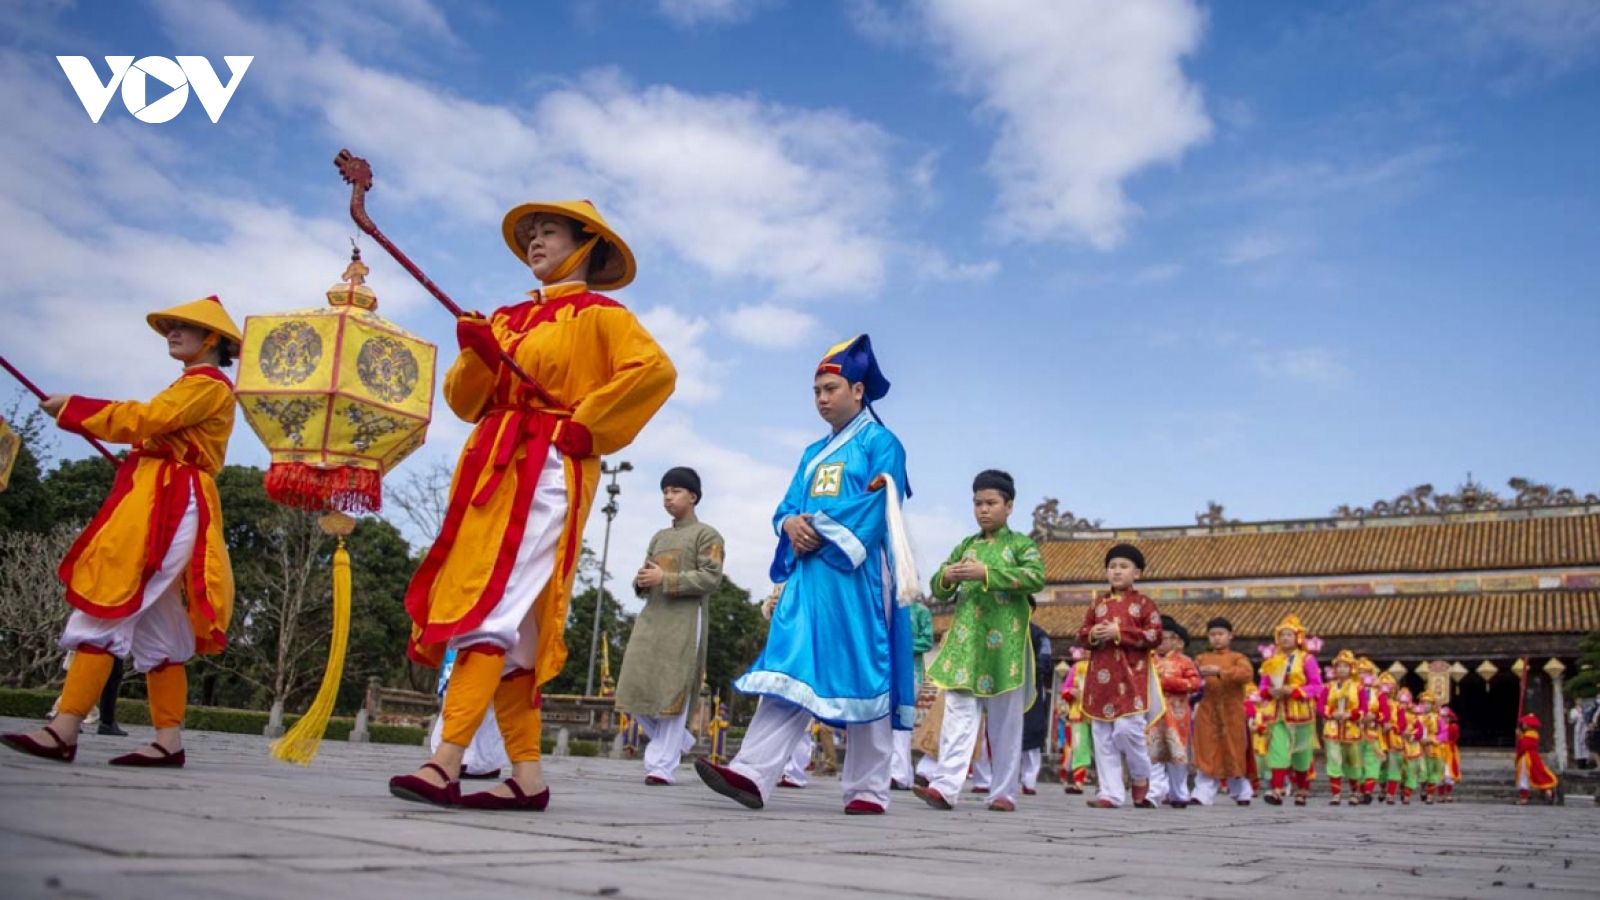 Tet customs in Nguyen royal court come to life in Hue